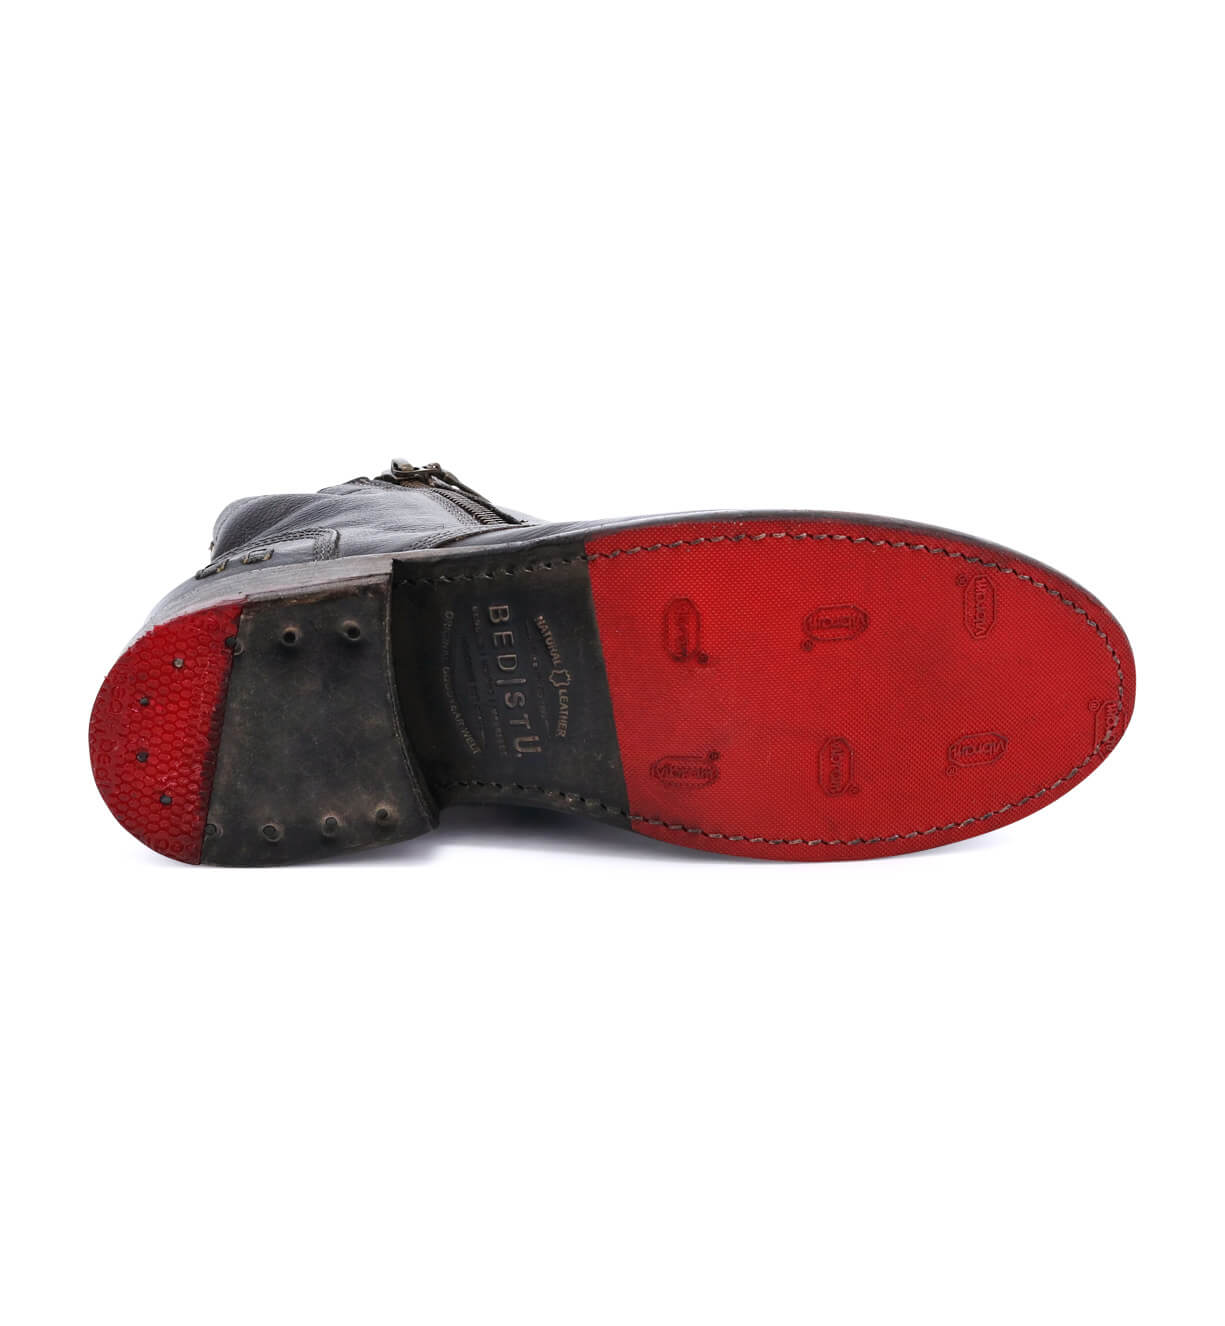 A pair of enduring Bed Stu Bonnie black lace-up shoes with red soles on a white background.